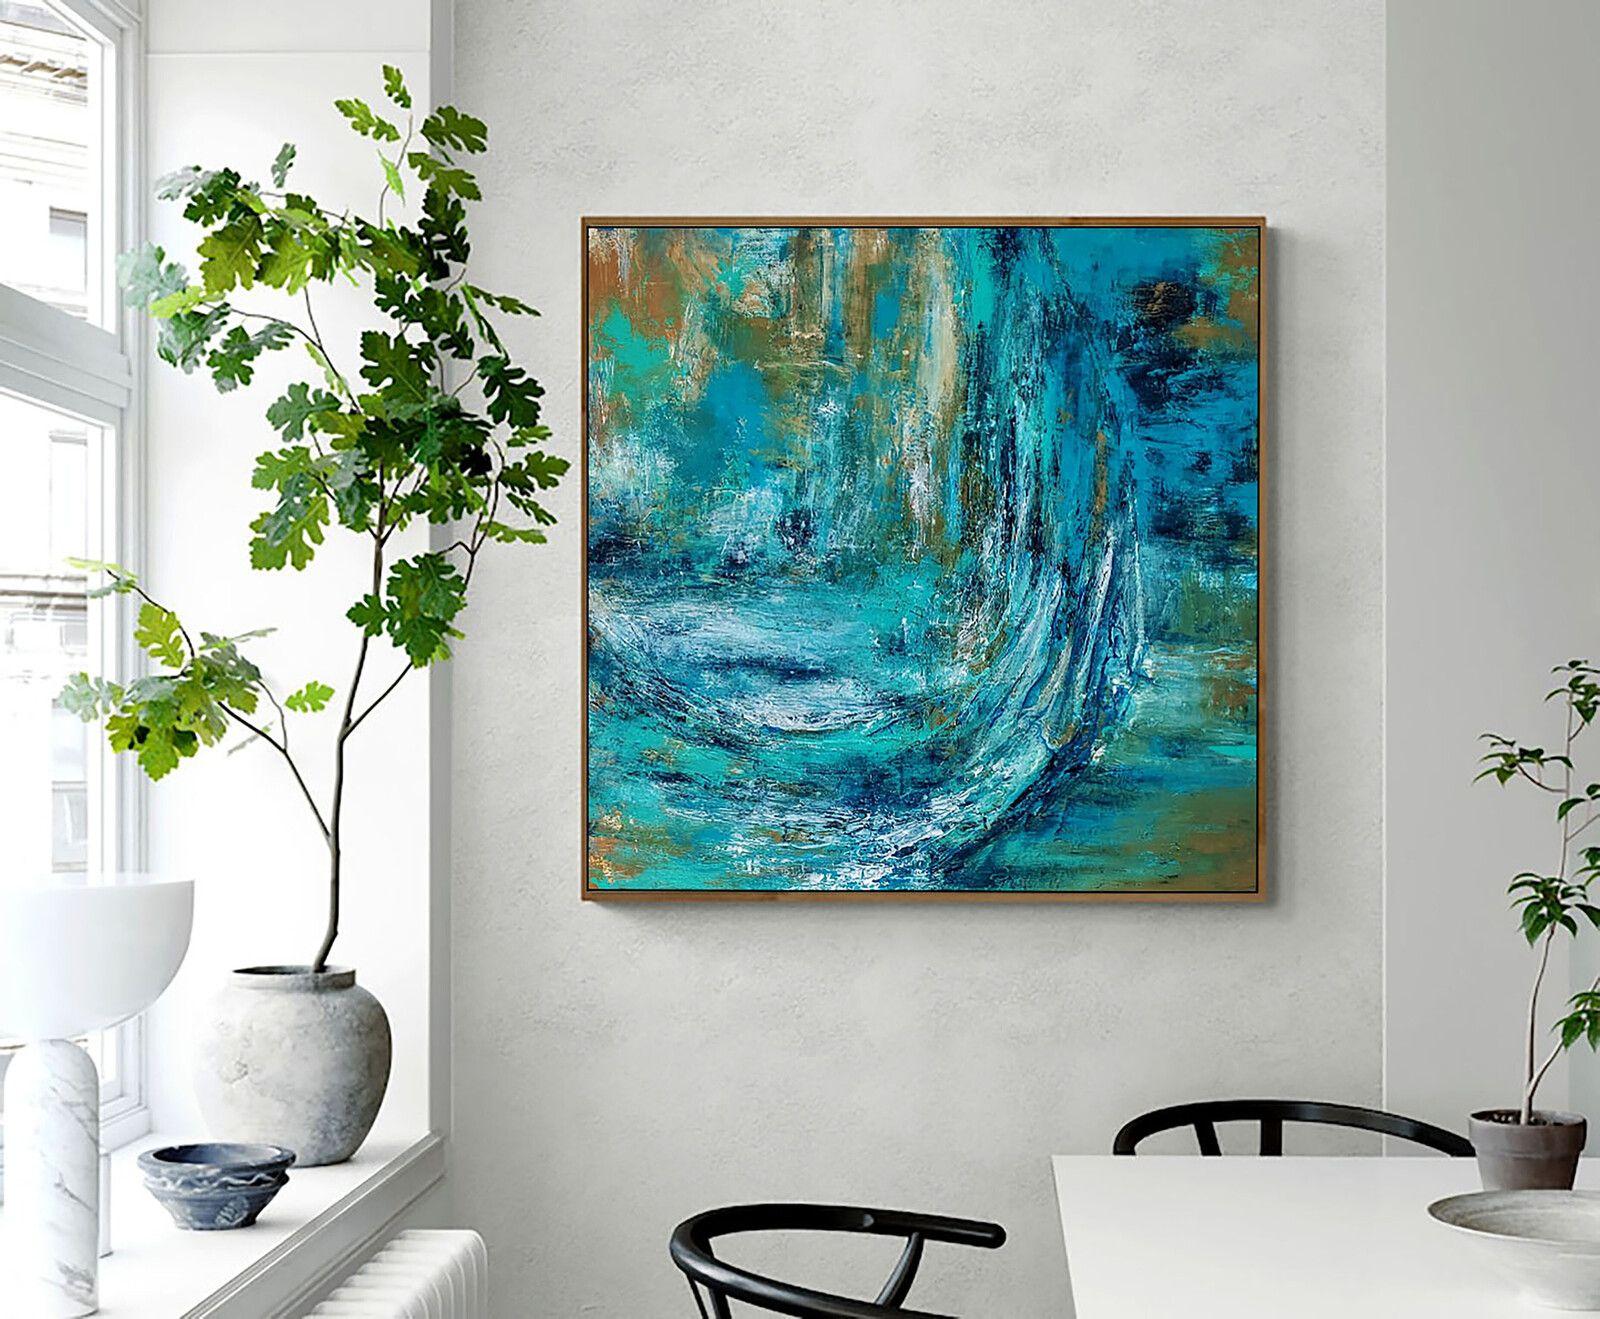 Acrylic on canvas, Texture,100x100x2cm  Ships Ready to hang  Medium: High Quality Acrylic colors, High gloss Varnish,  This painting is made on high quality gallery wrapped canvas with no visible staples .The sides are finished and painted.  High